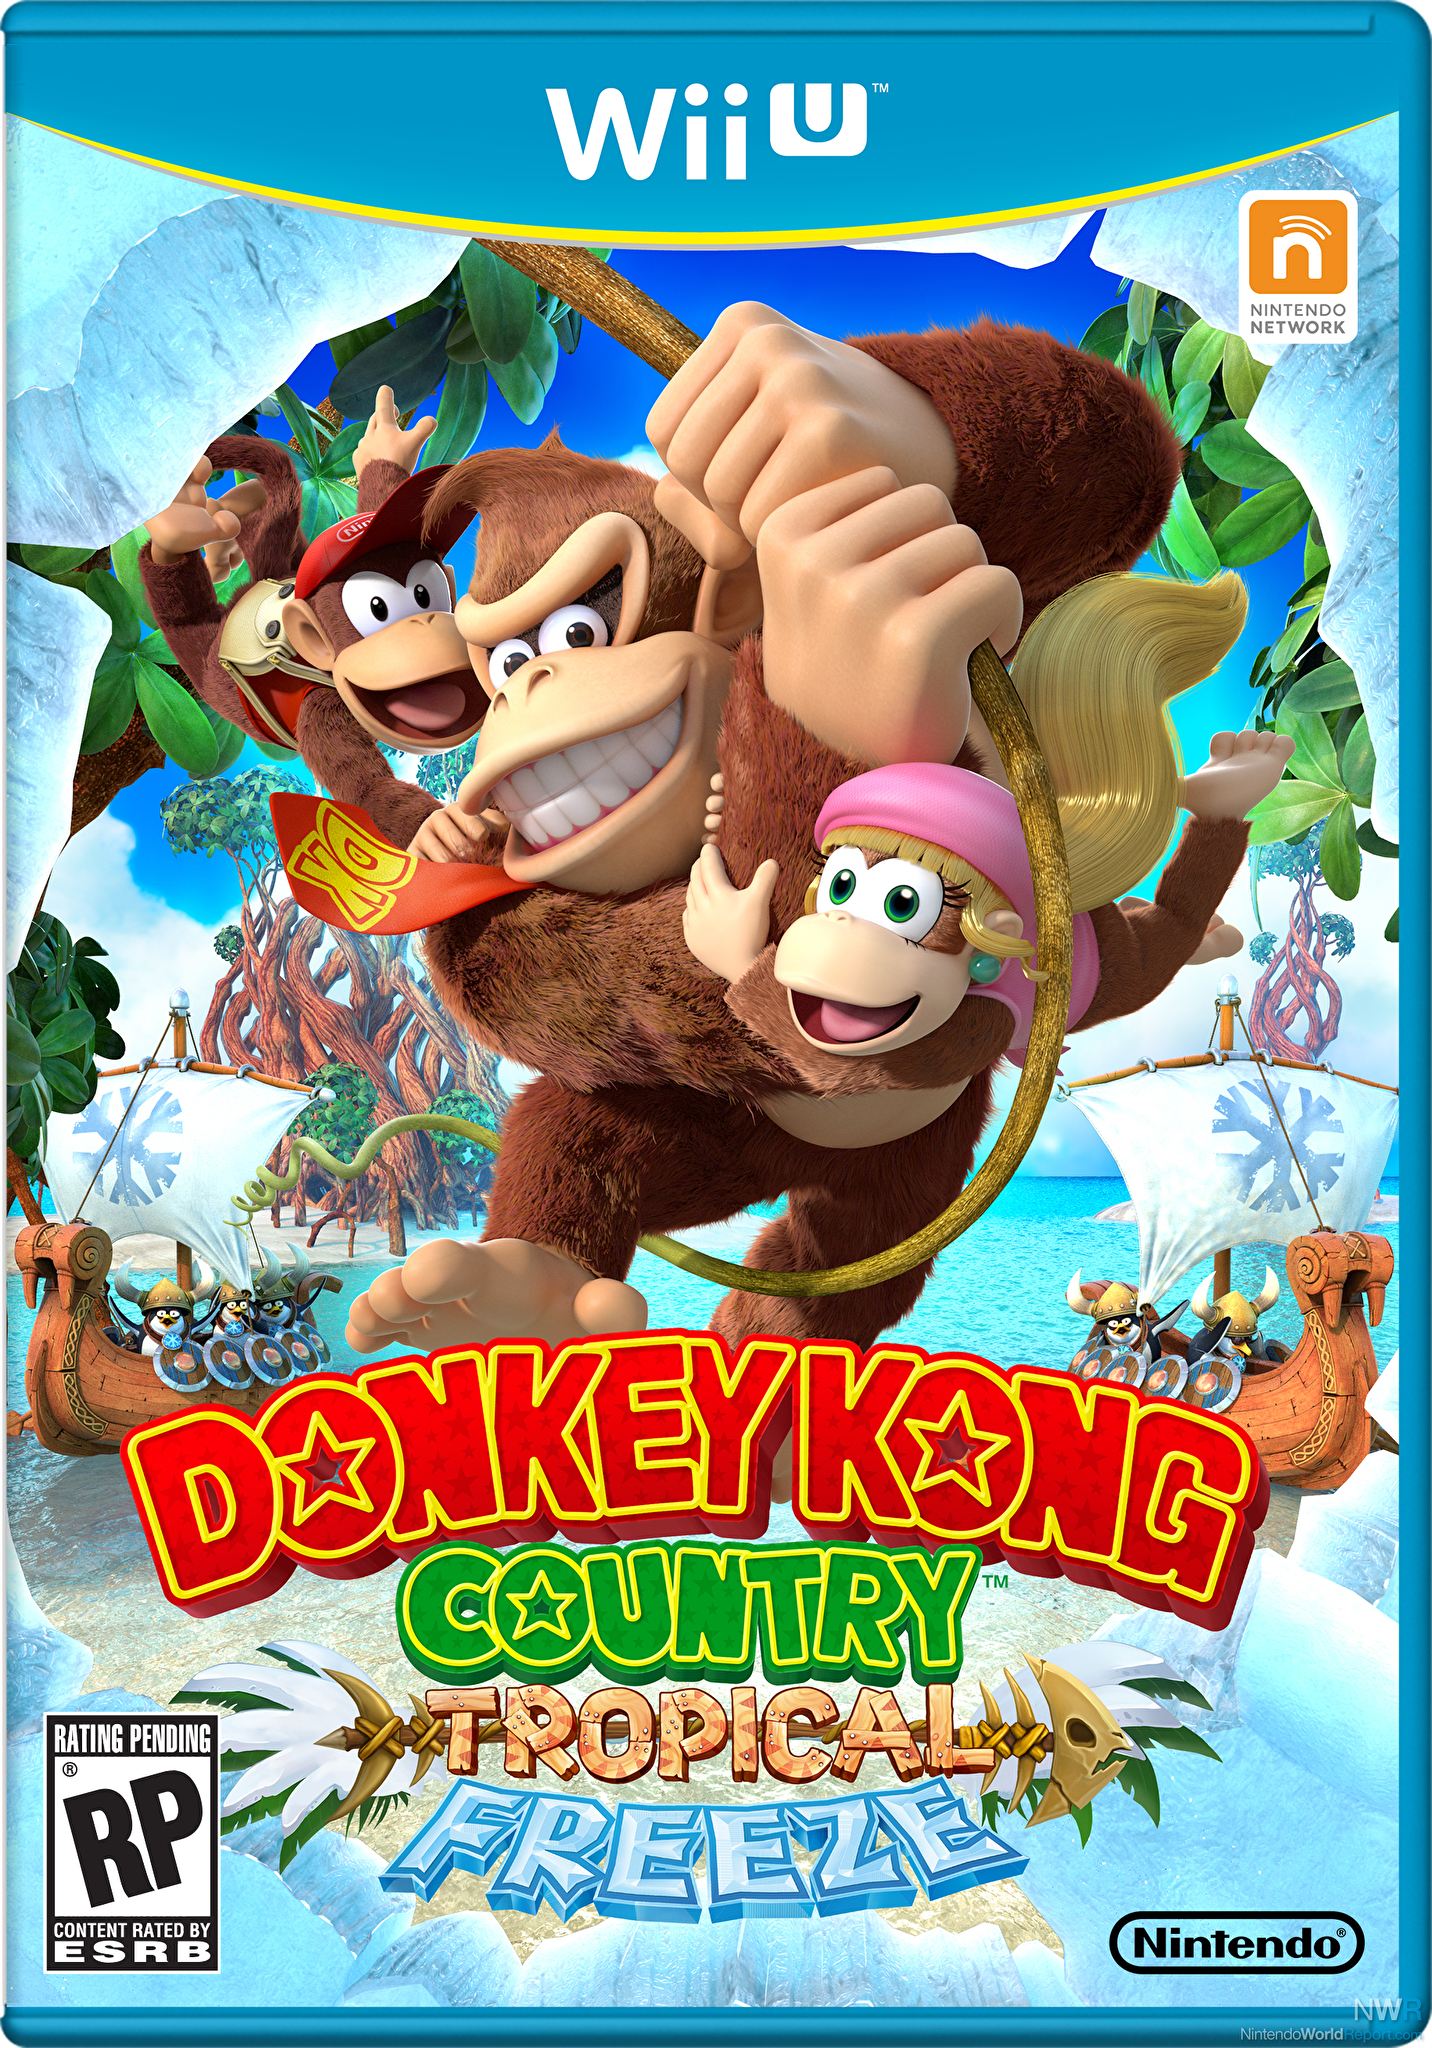 Rumours about Donkey Kong: When will the new Nintendo game be